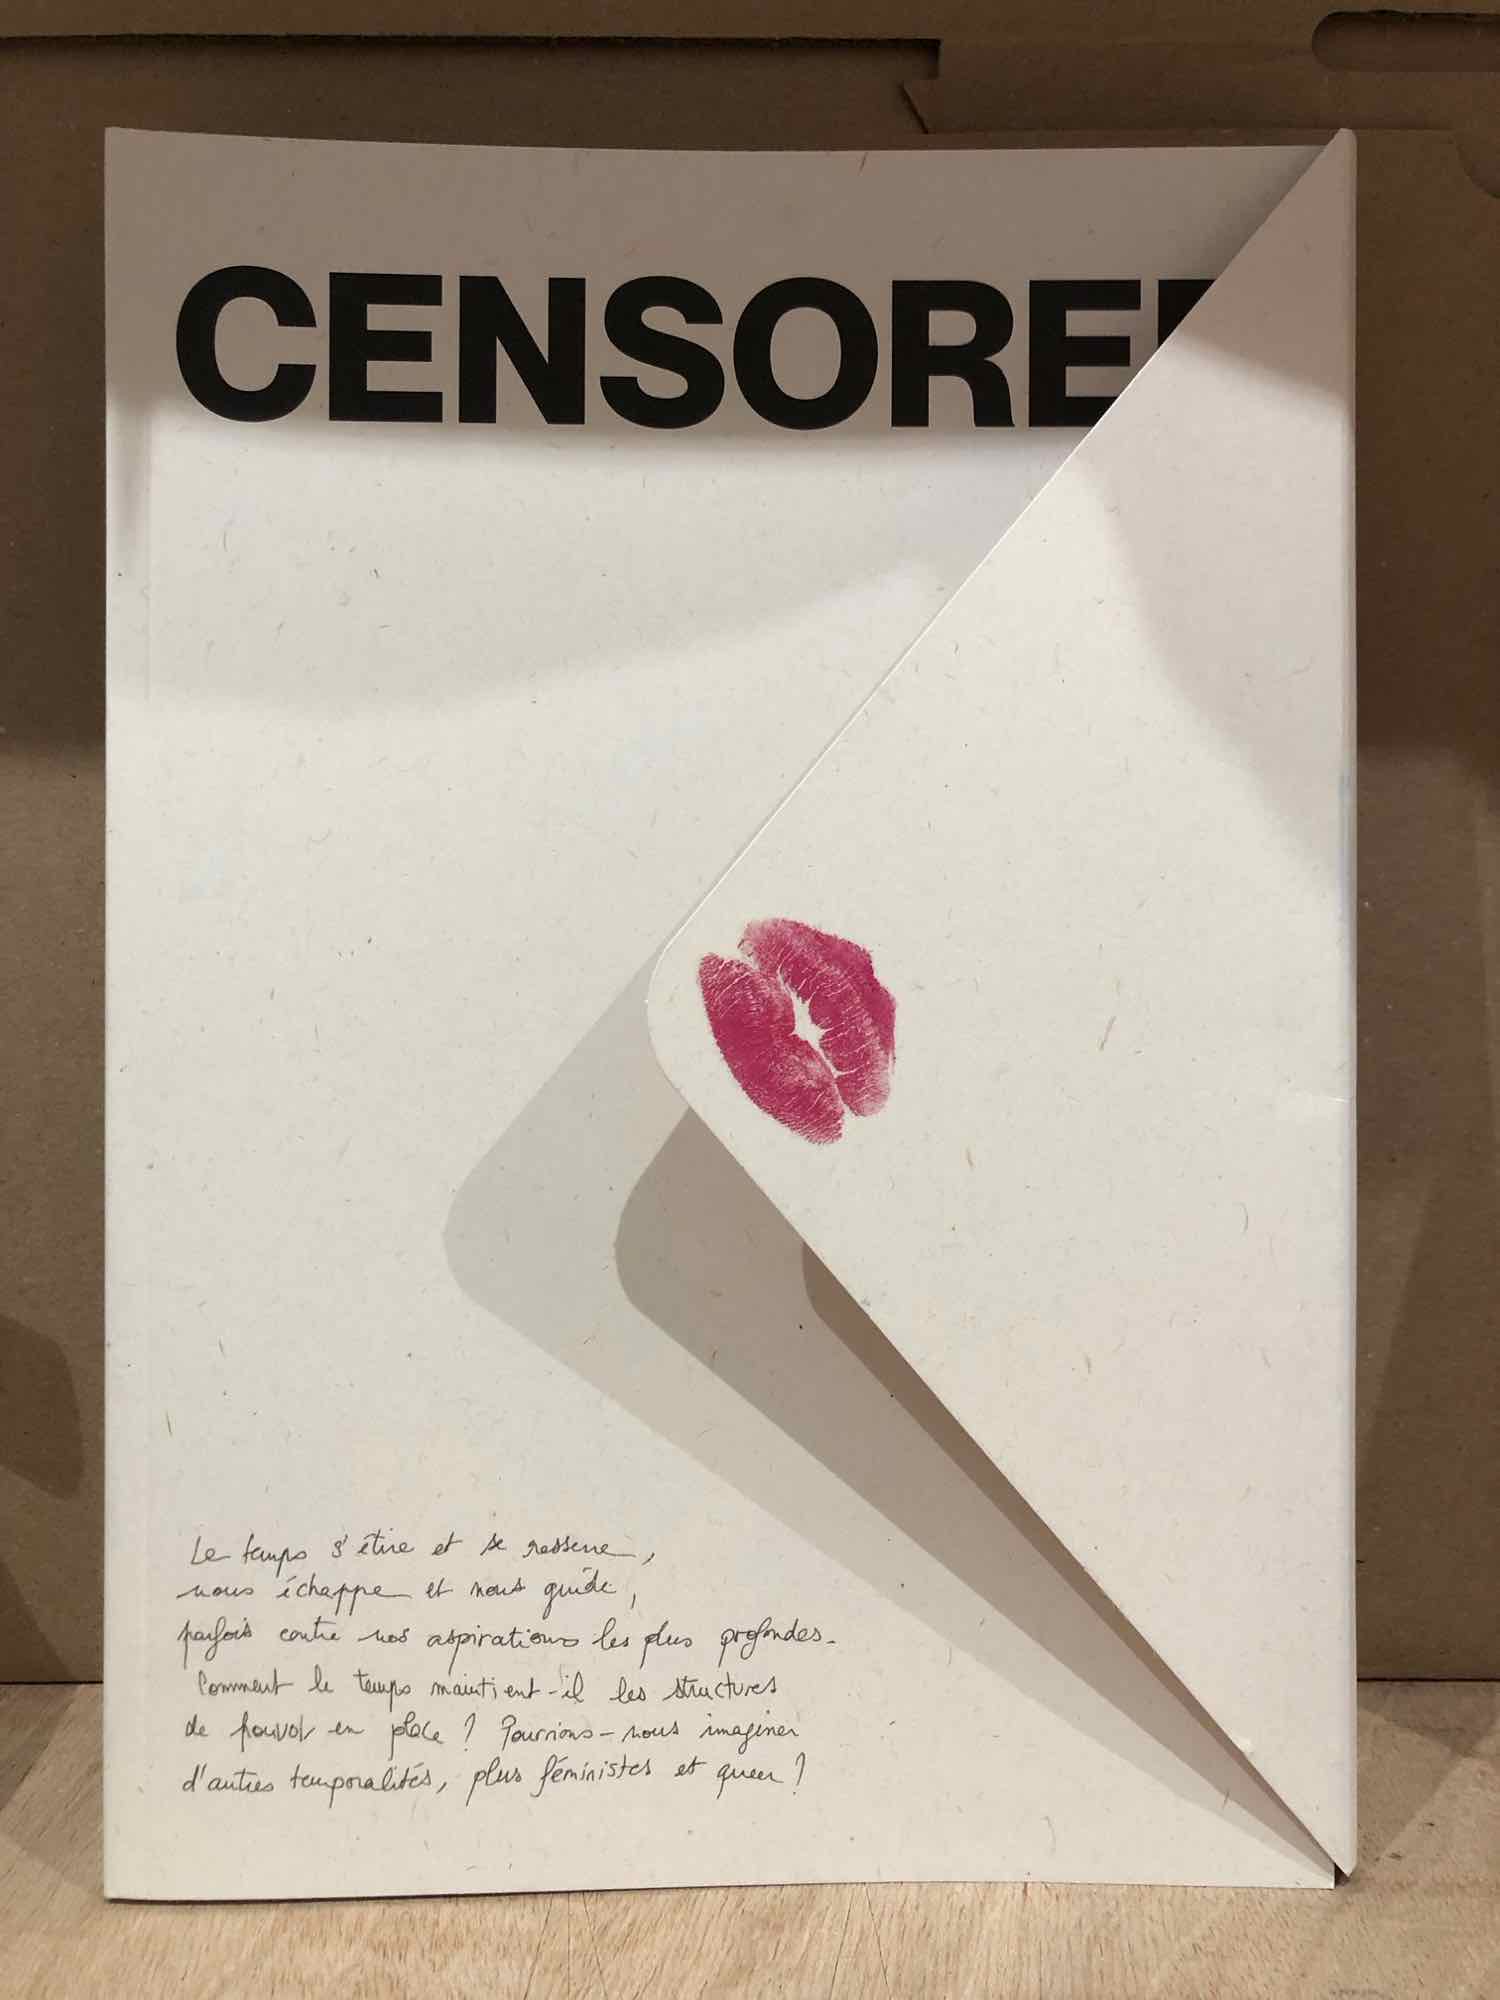  LABROSSE, Apolline; LABROSSE, Clémentine (eds.) - Censored #9 It's about time!